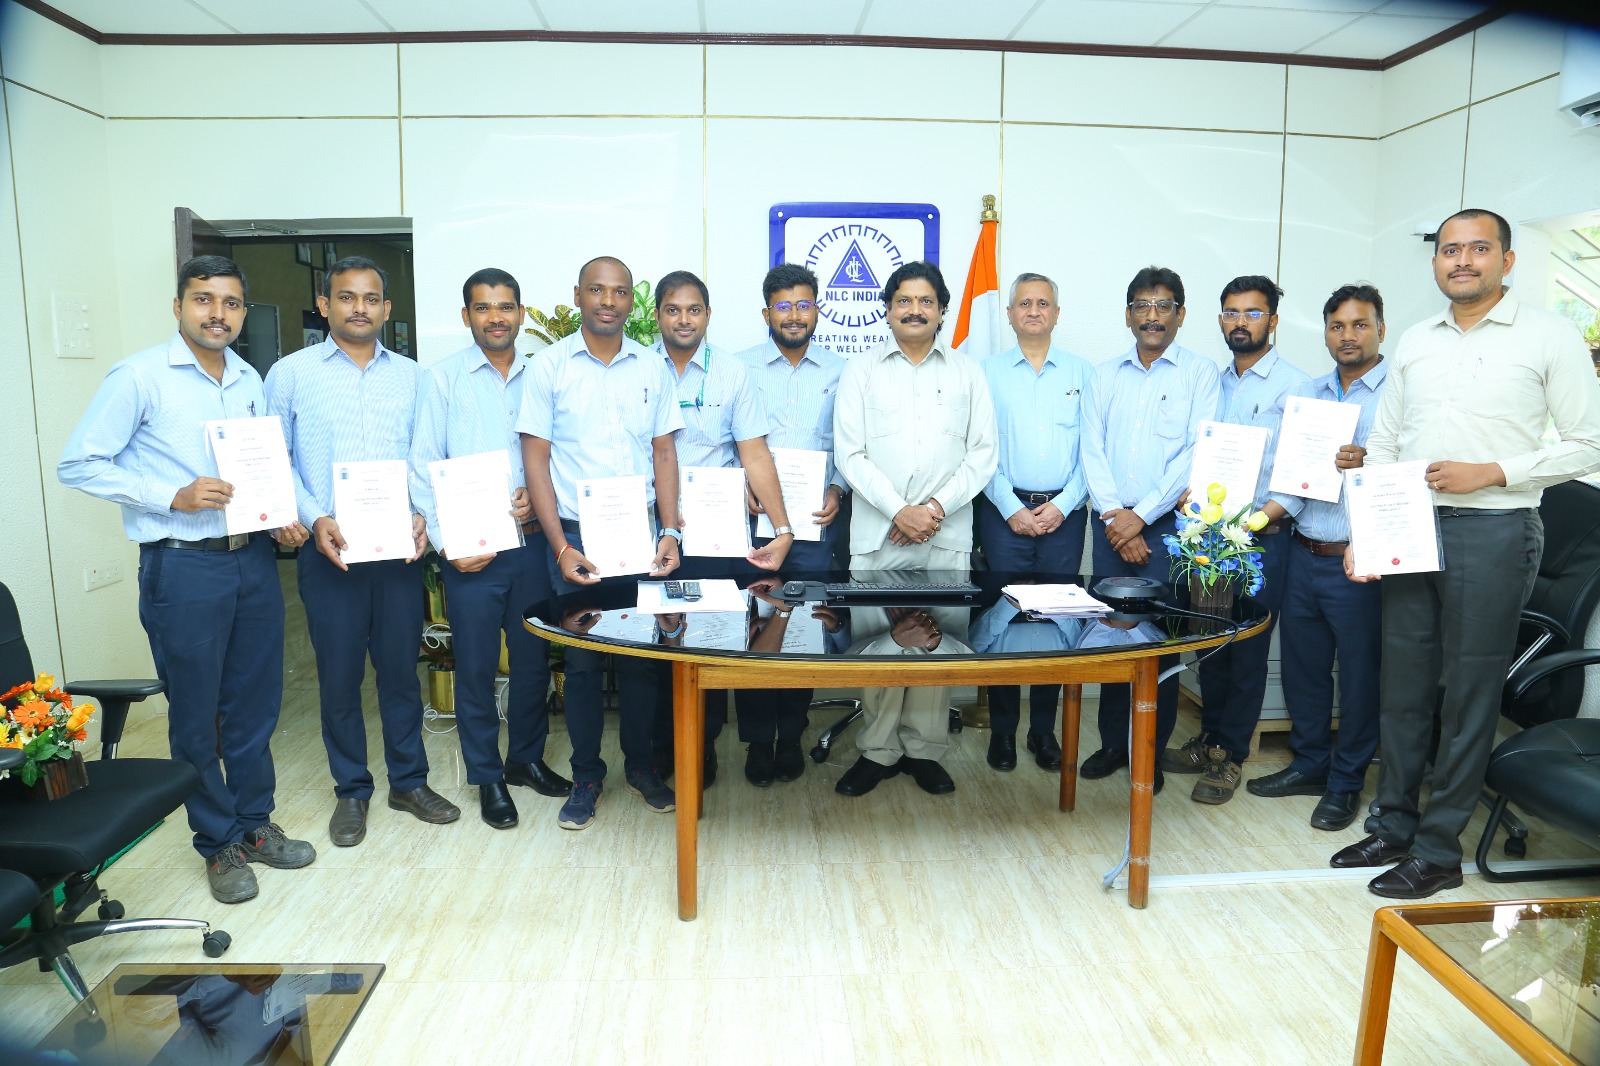 NLC India organised 'C' Level certificate program in Project management